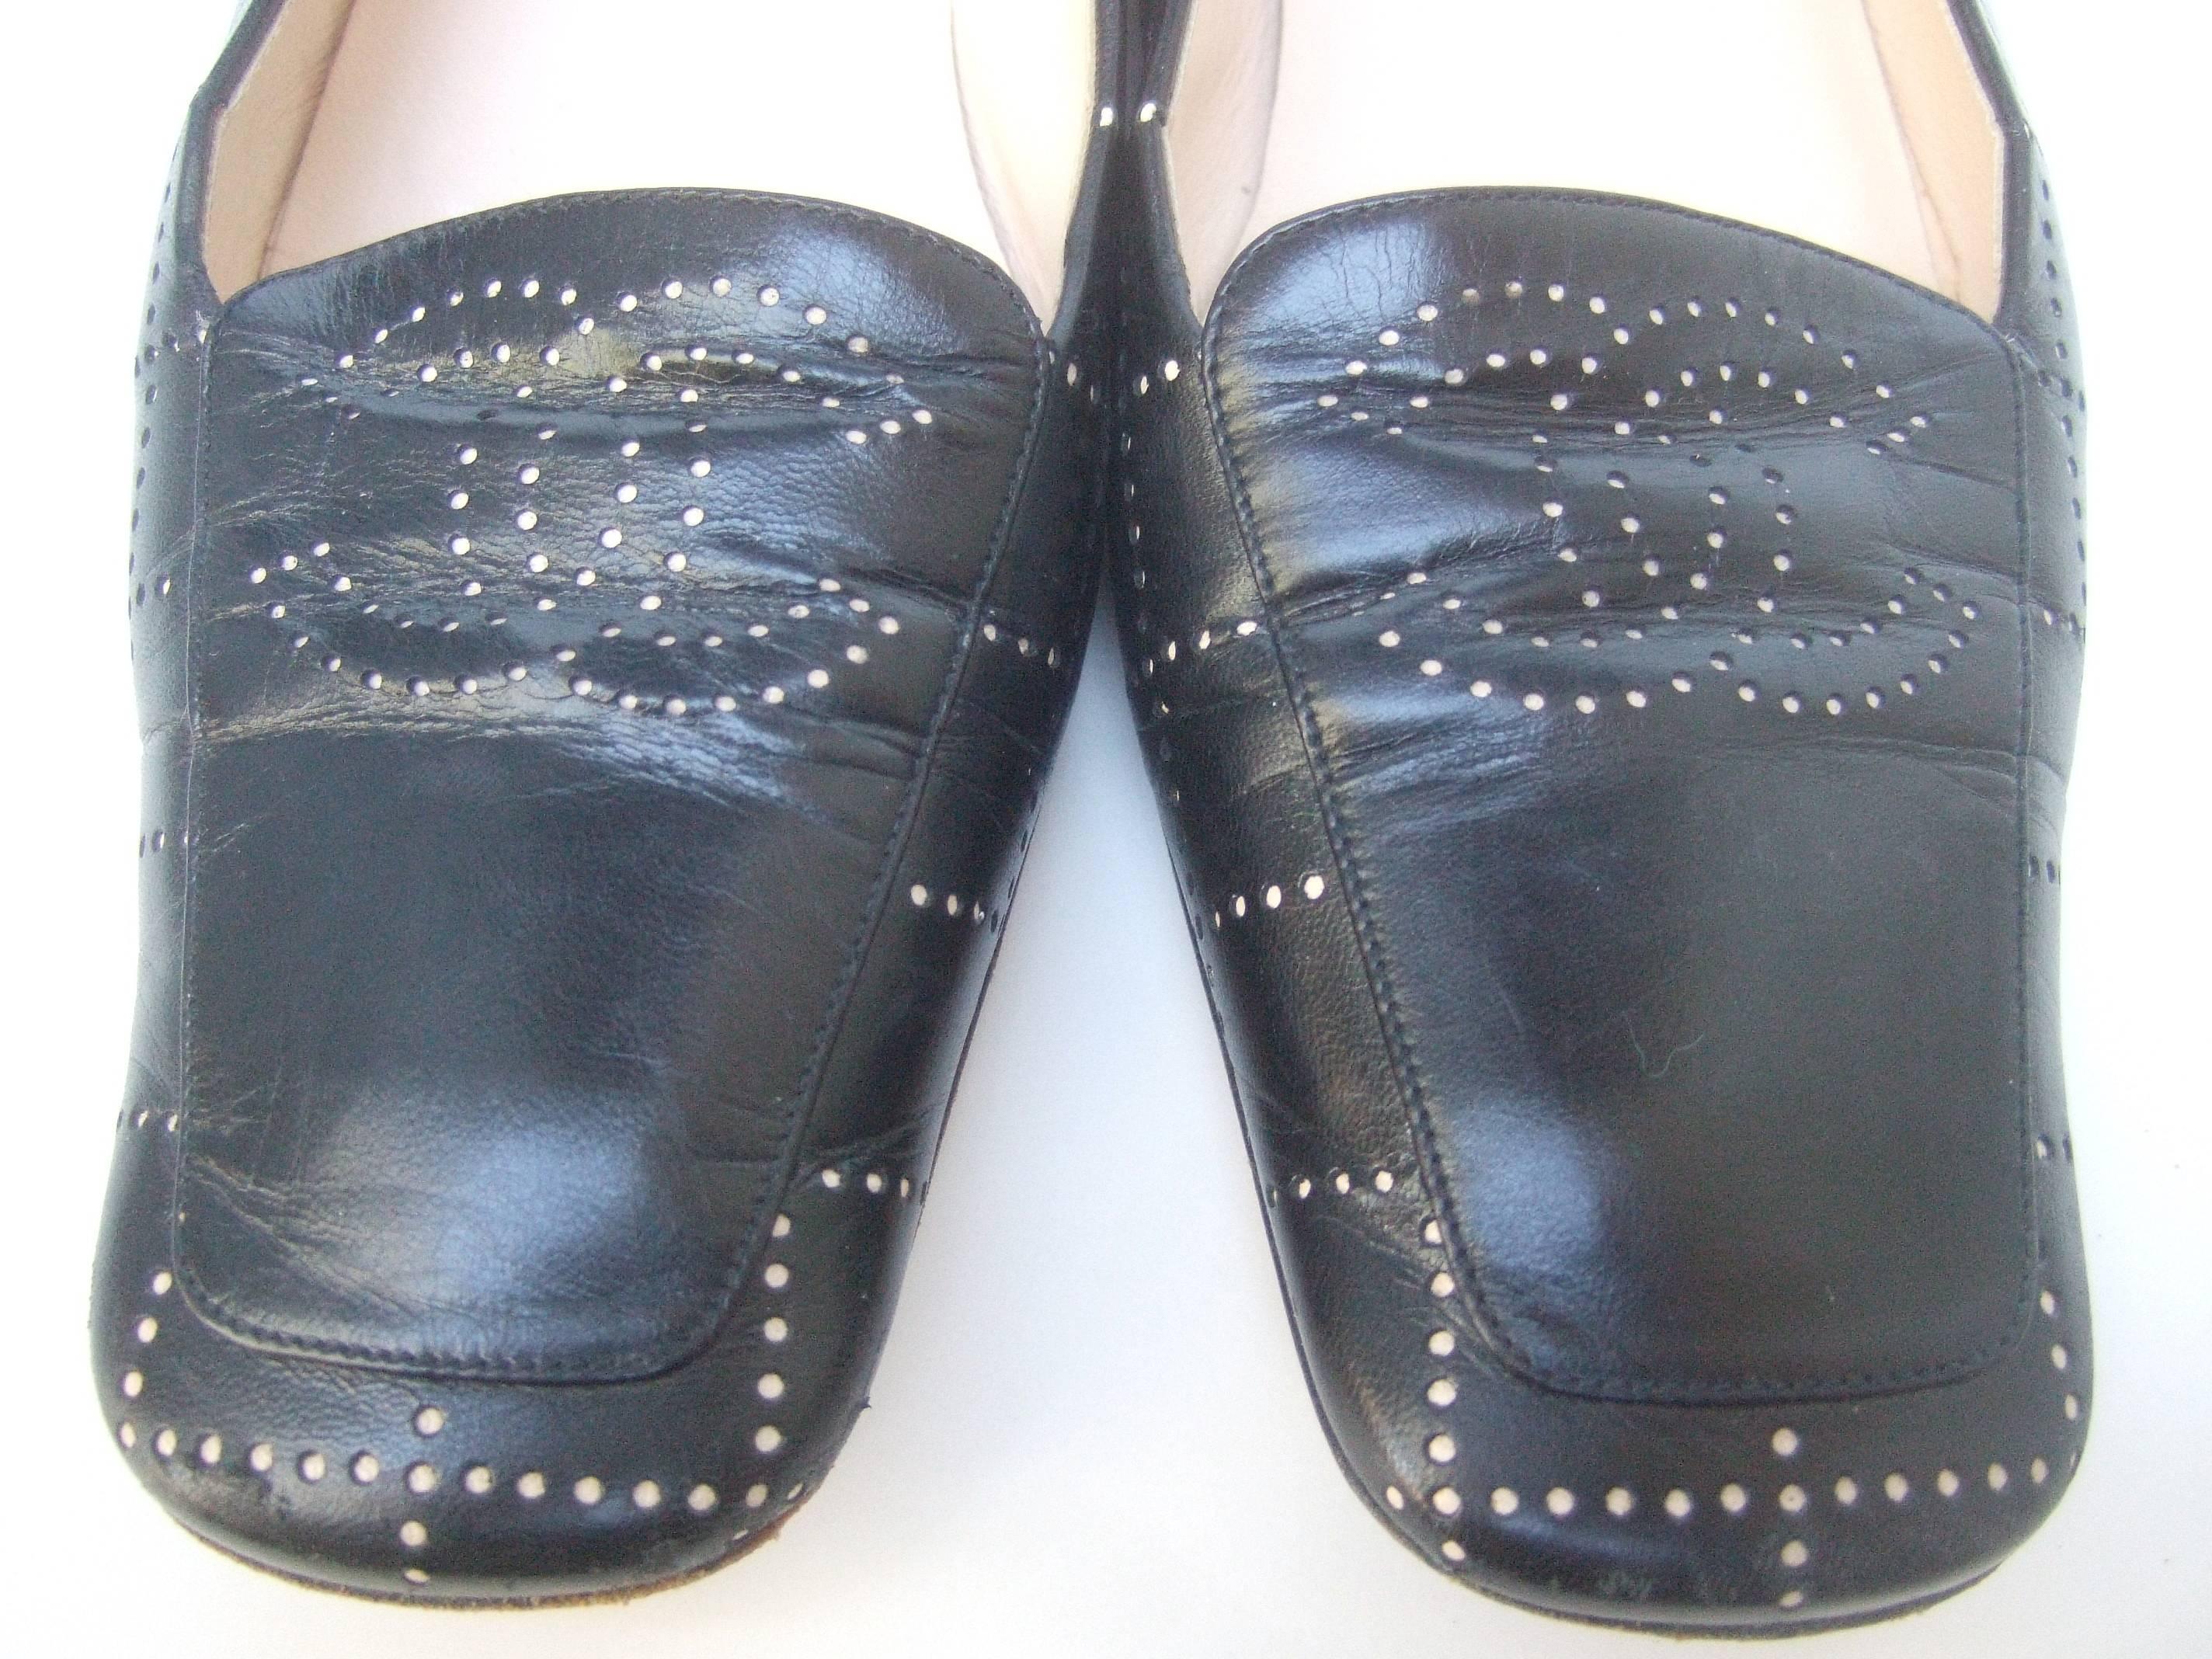 Women's Chanel Stylish Black Leather Perforated Skimmer Flats Size 37.5